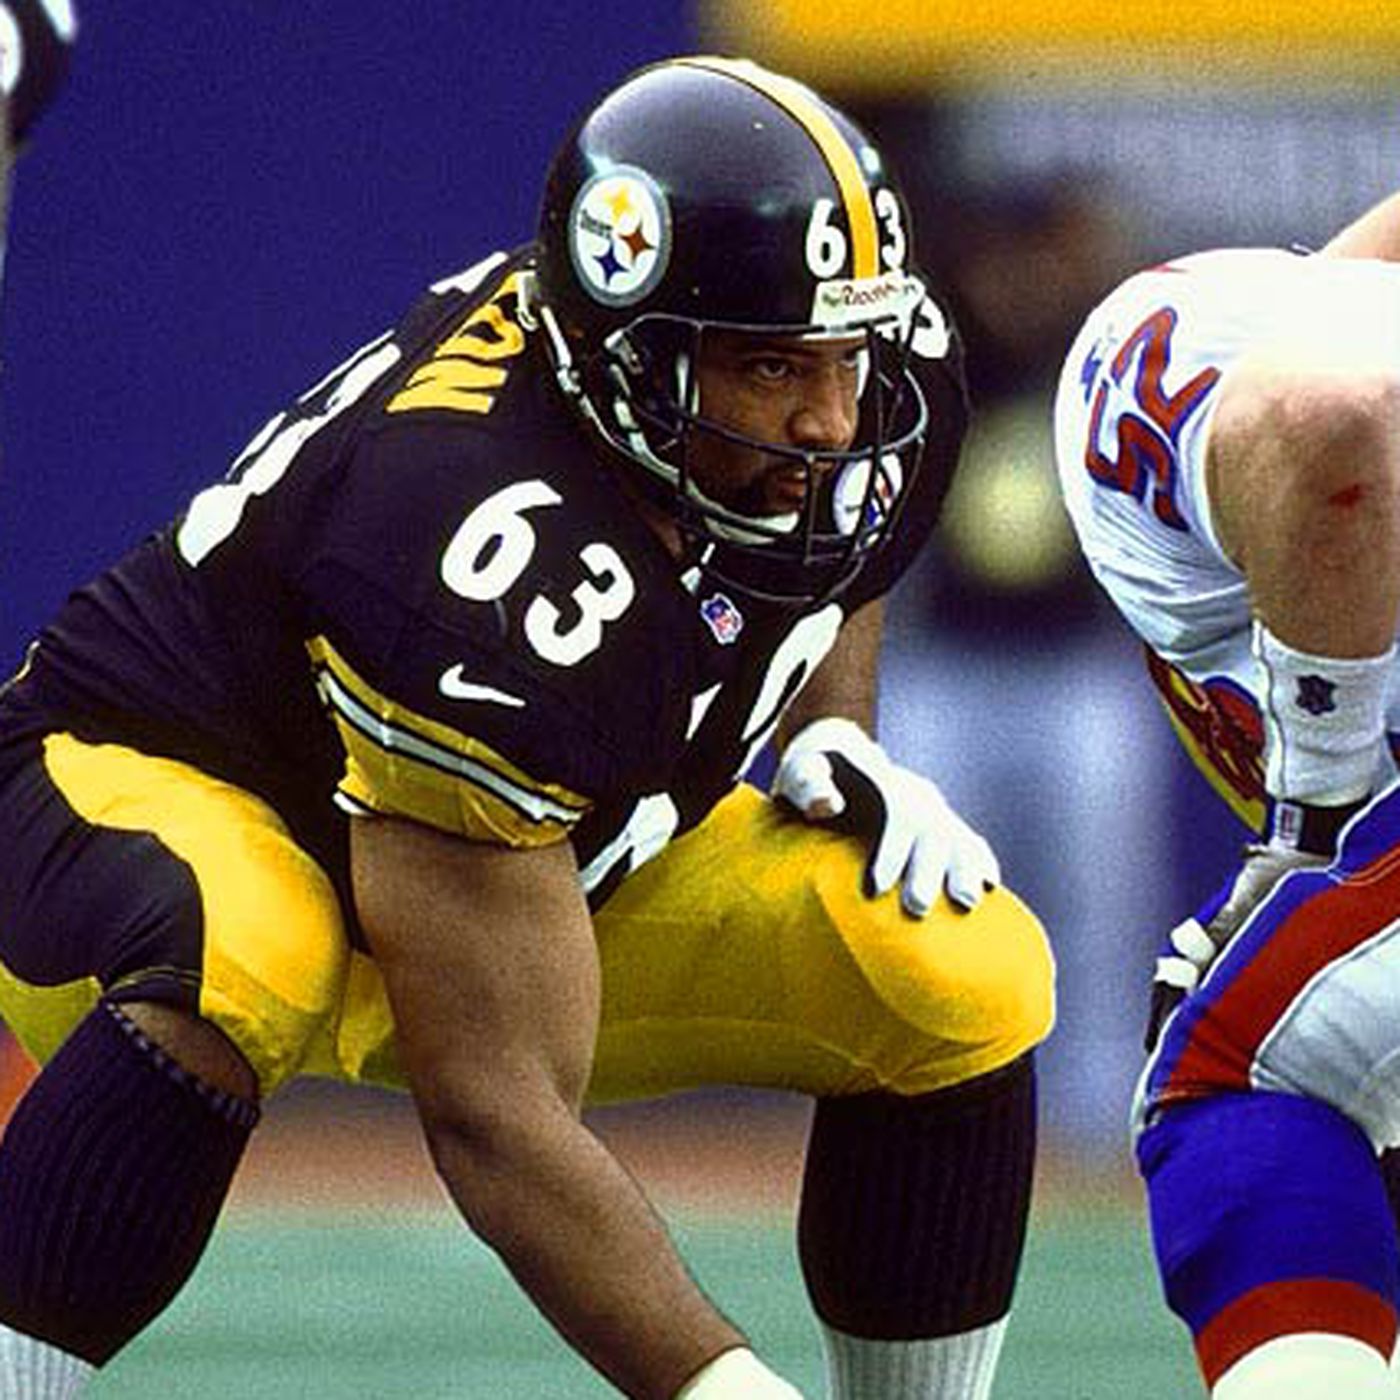 Steelers Throwback Thursday: Watch Hall of Fame center Dermontti Dawson  crush defenses - Behind the Steel Curtain